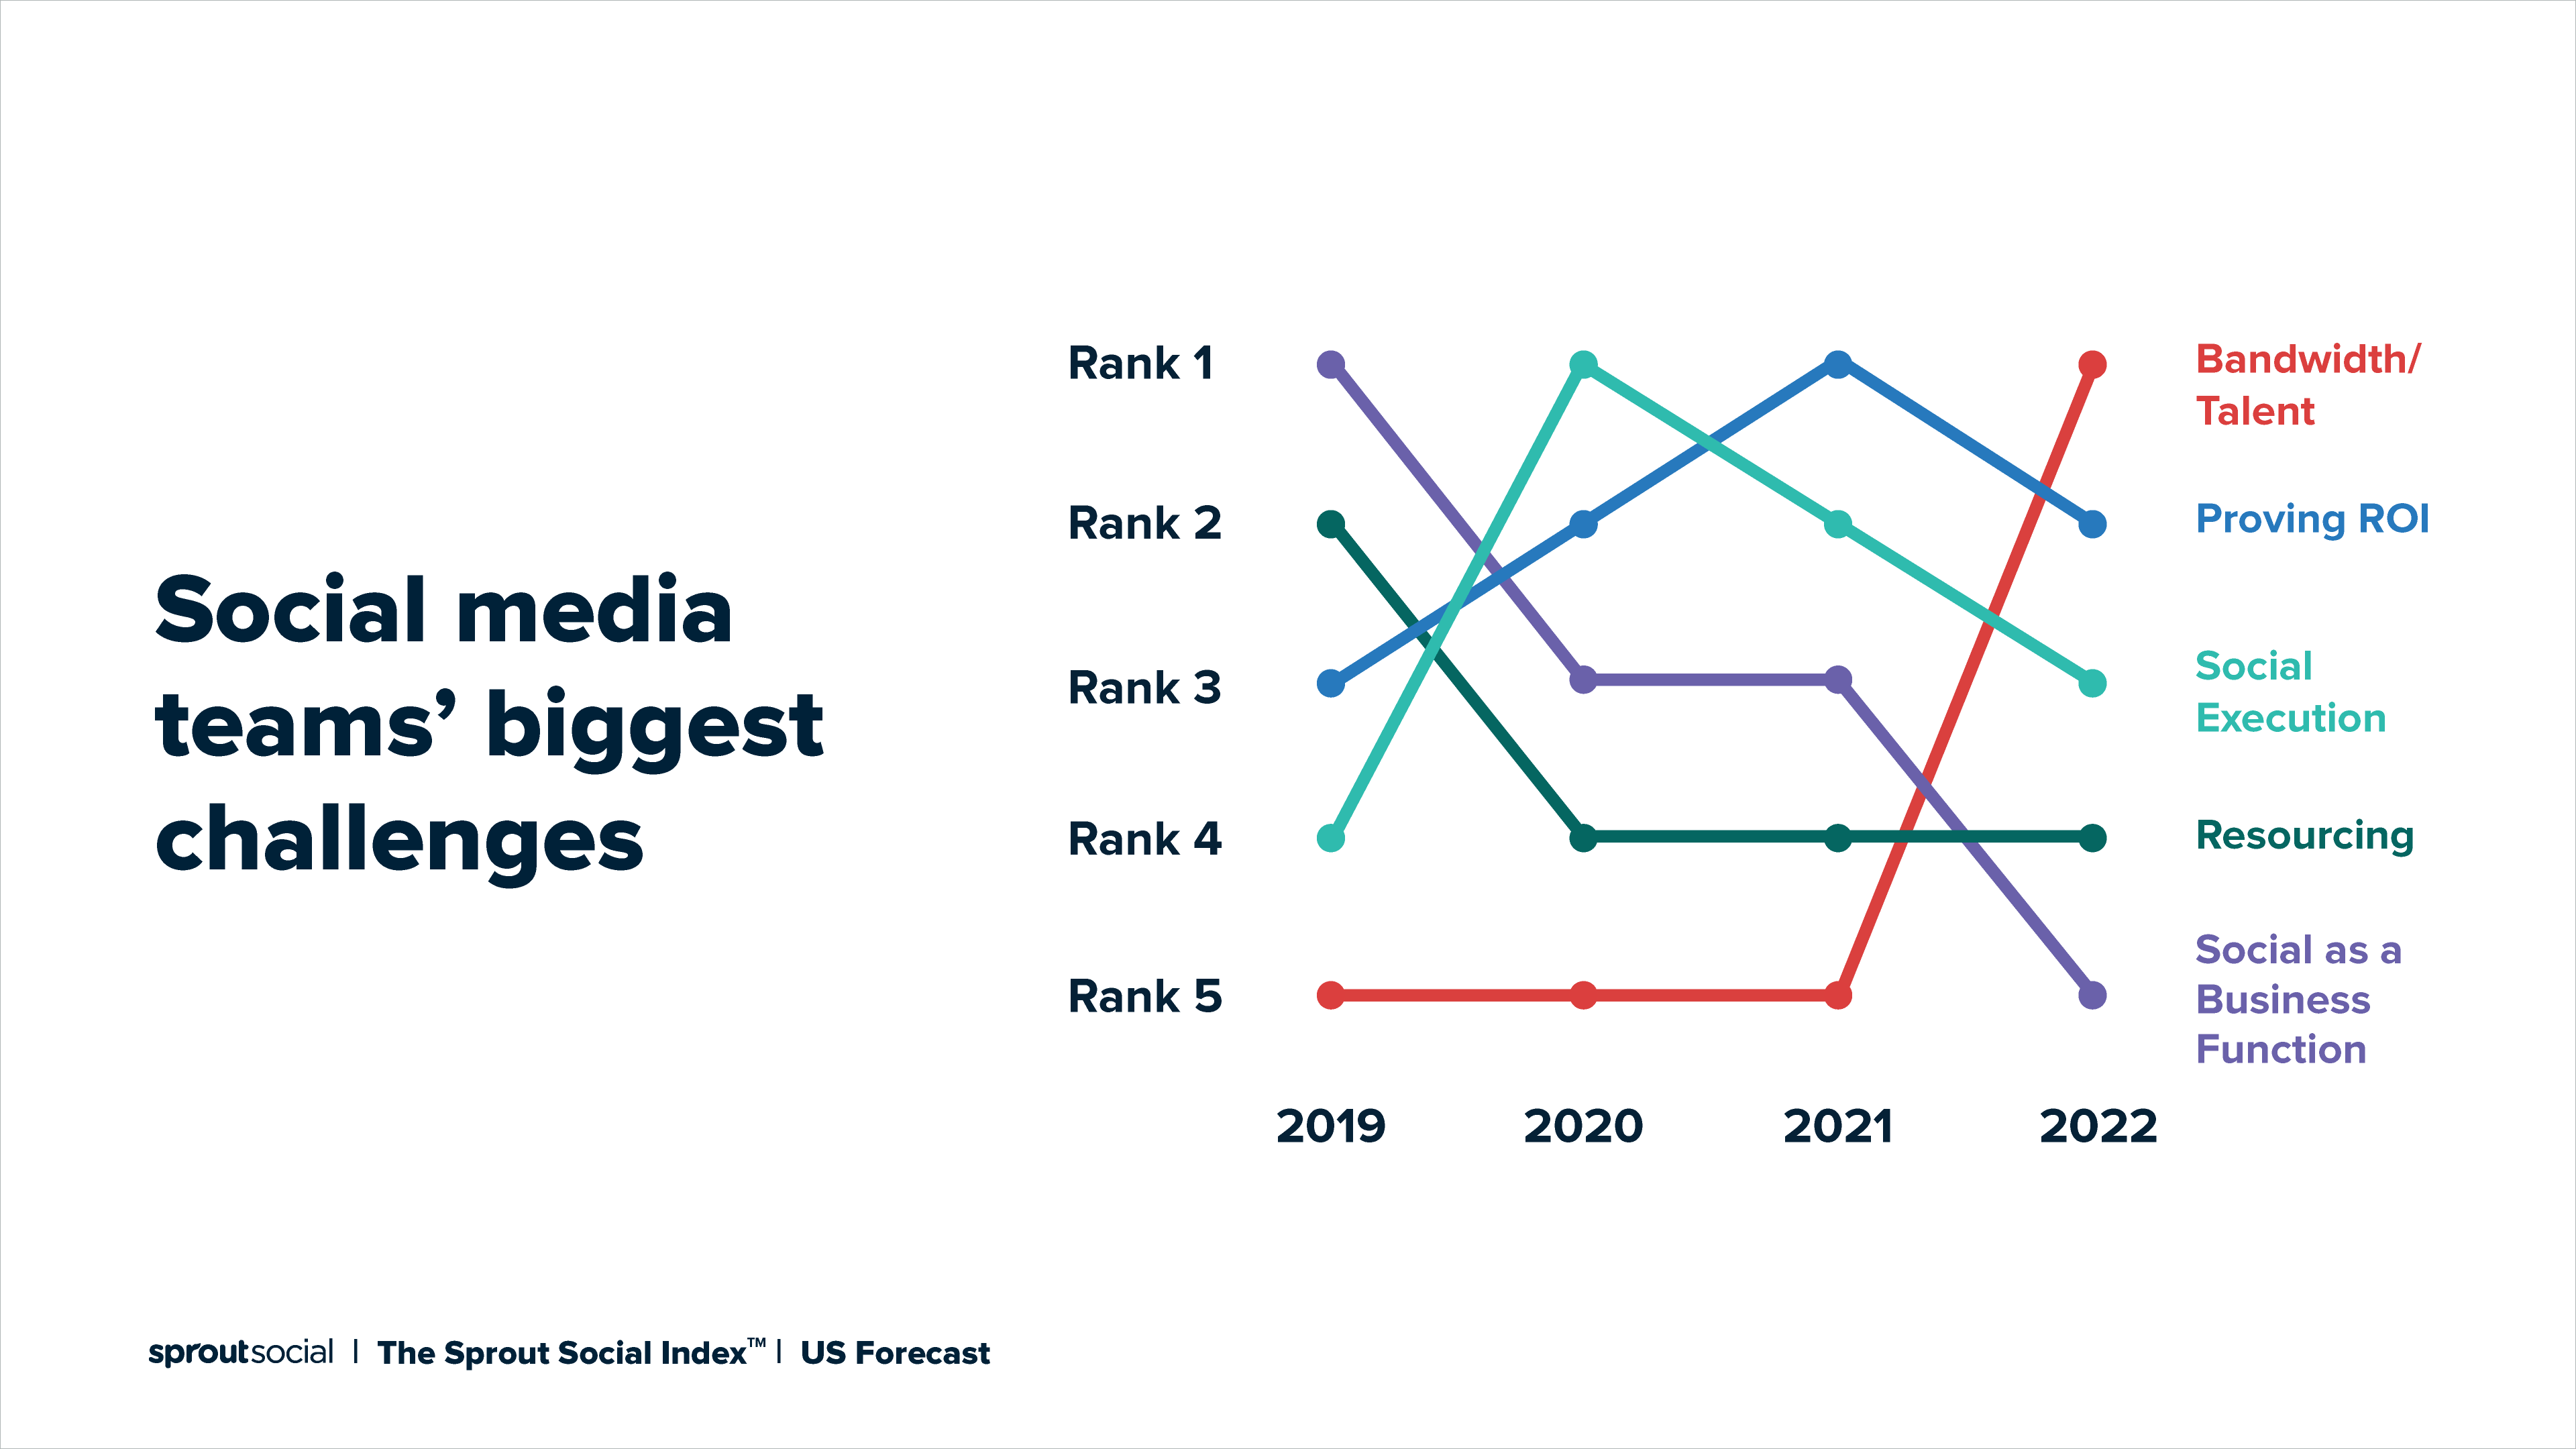 Bar chart depicting how social media teams' biggest challenges have evolved from 2019 through 2022